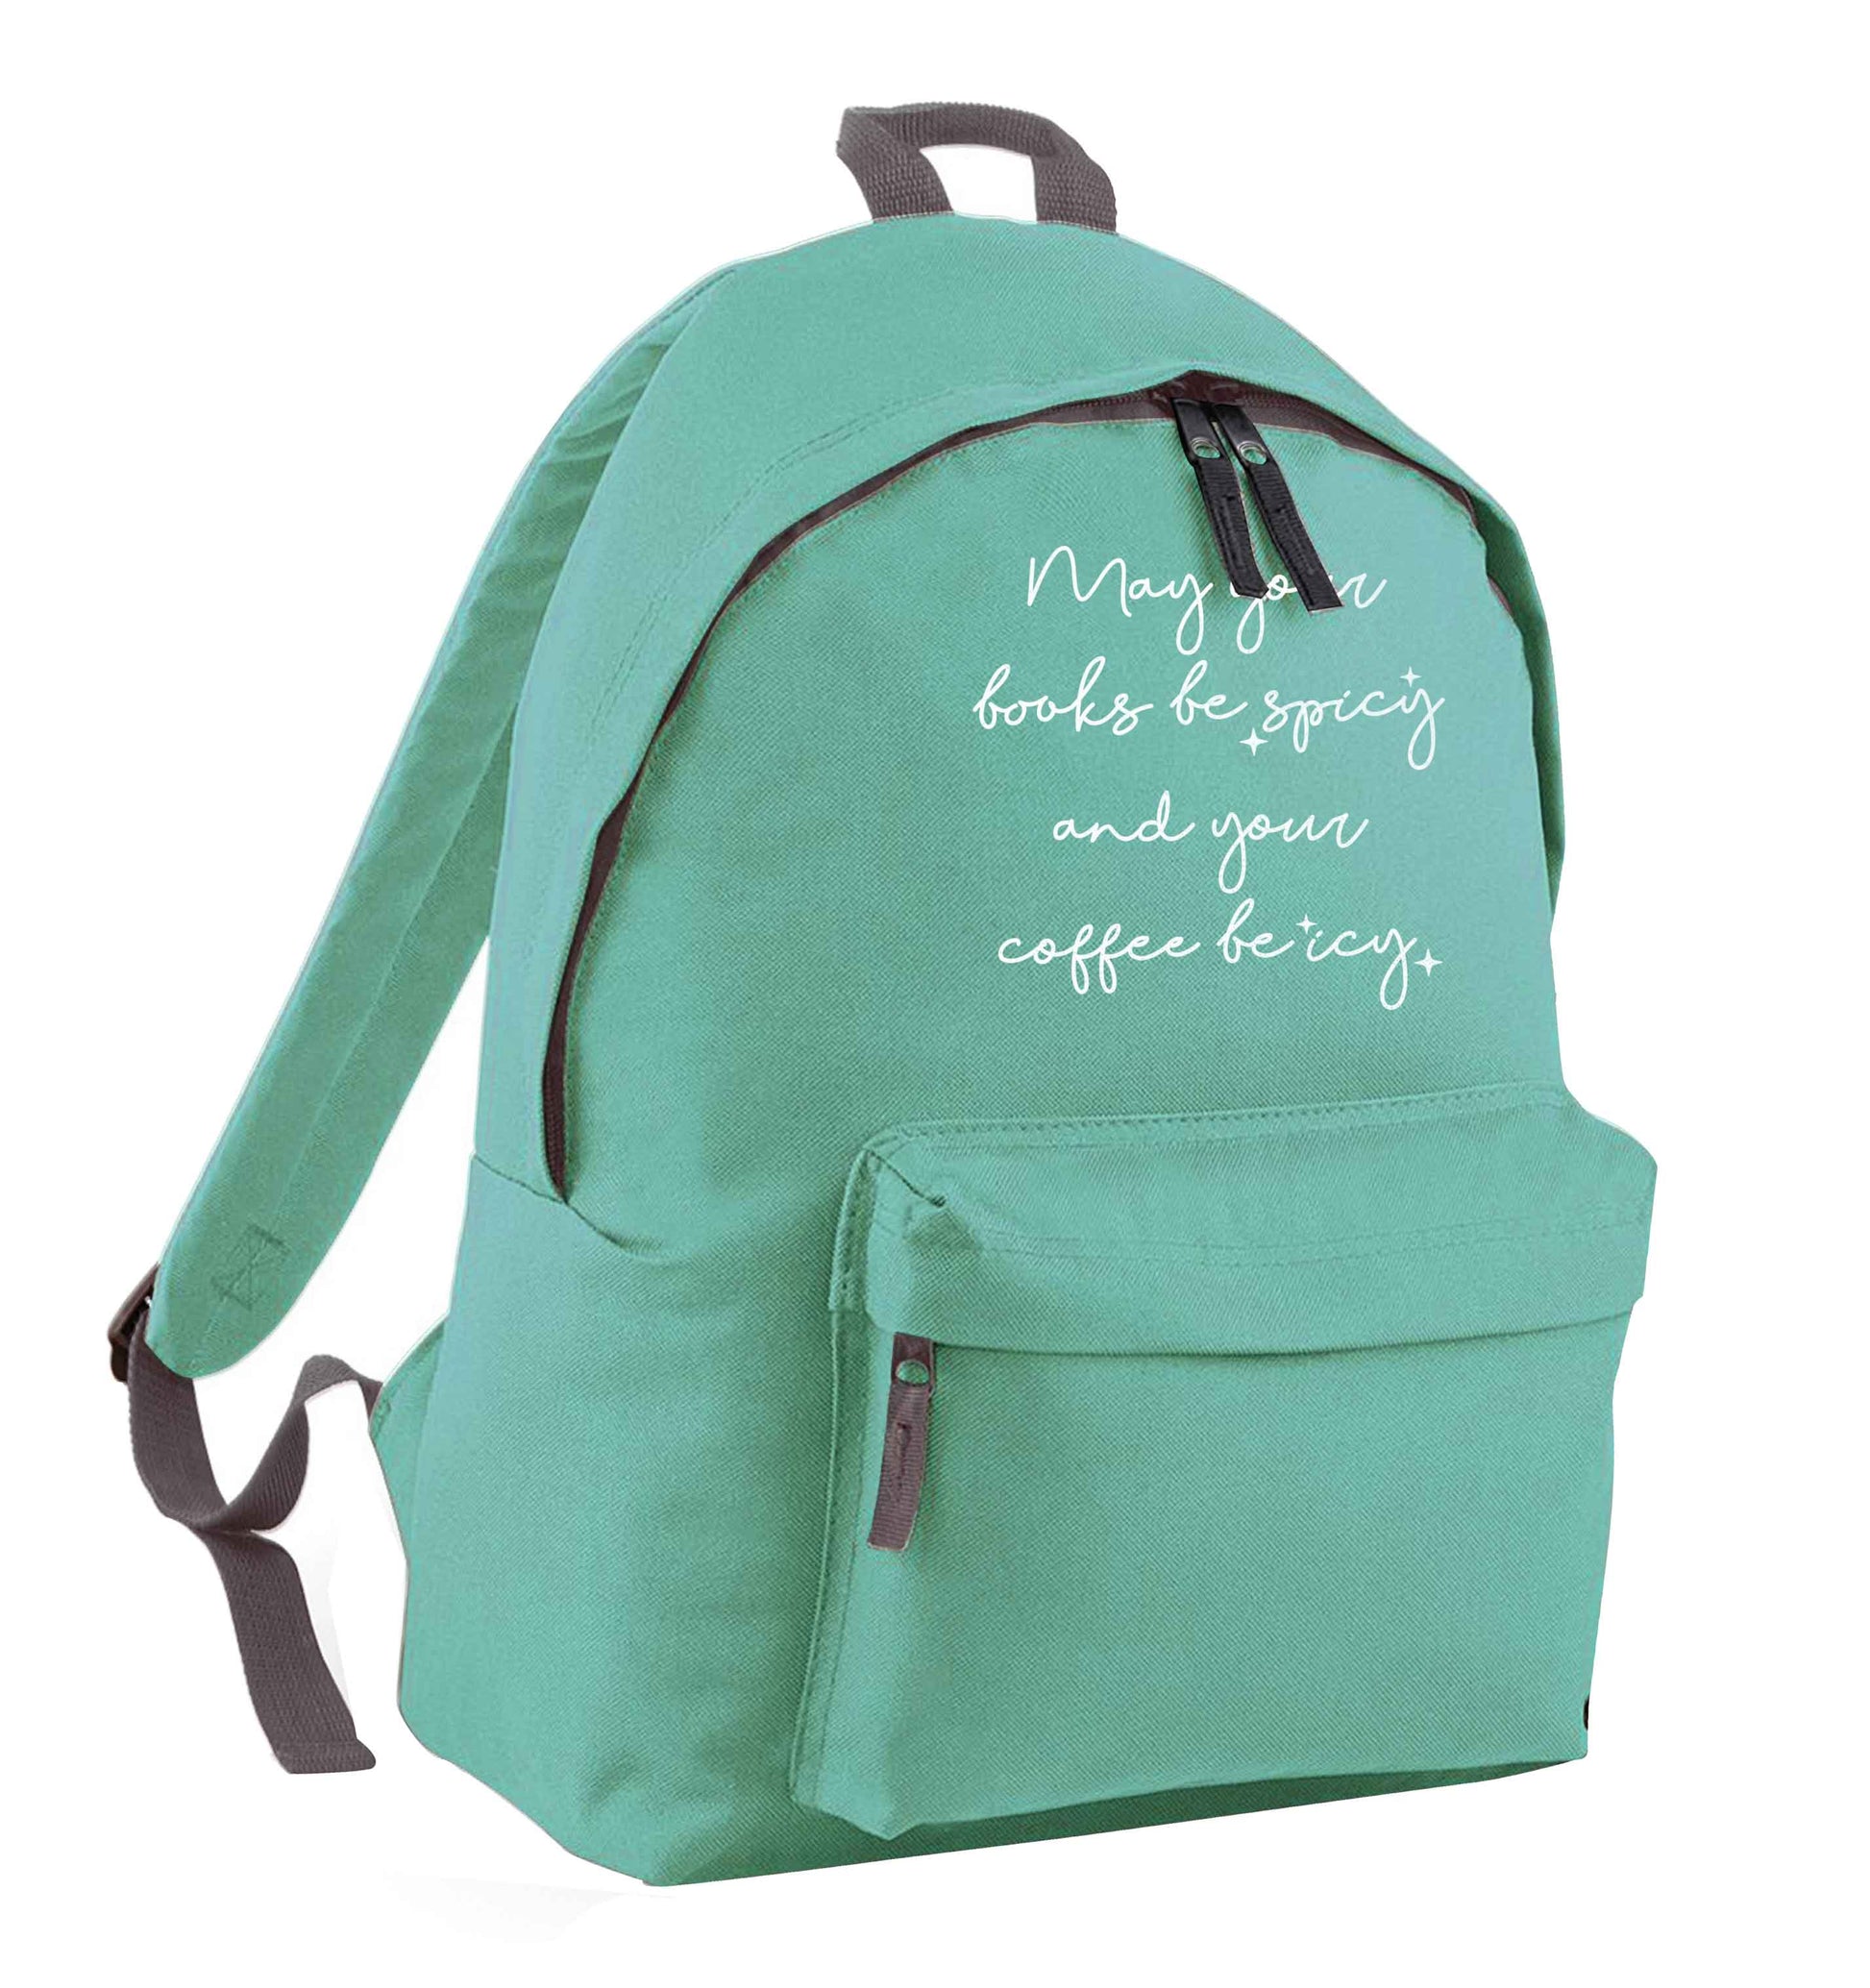 May your books be spicy and your coffee be icy mint adults backpack